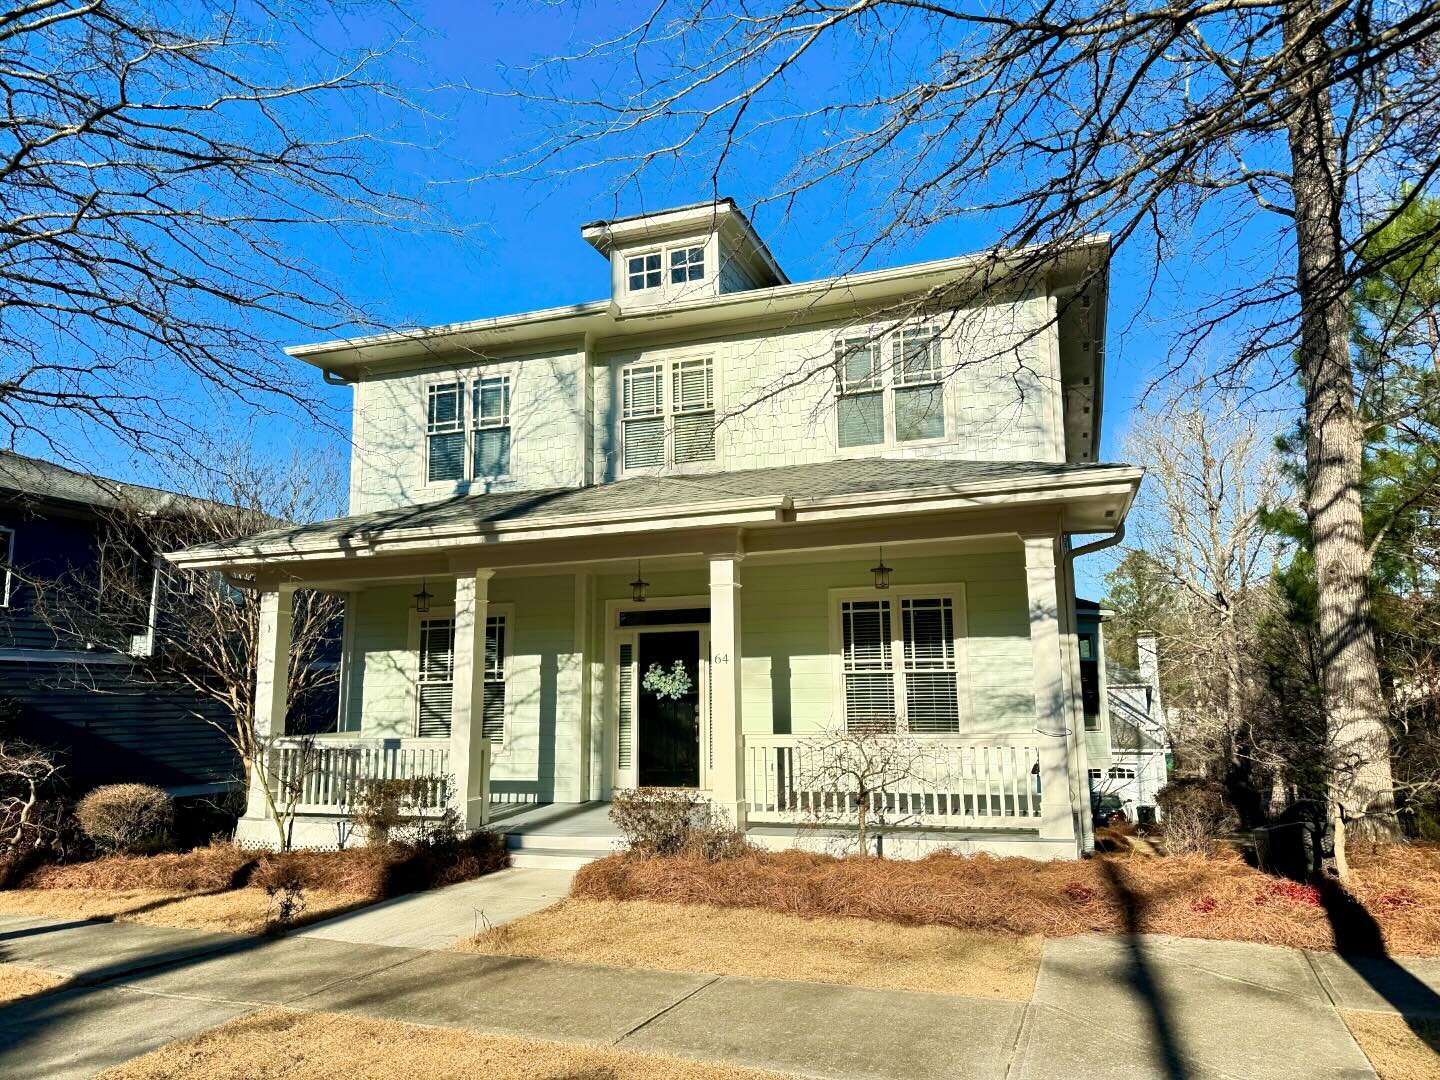 🚨OPEN HOUSE THIS SUNDAY 2-4PM🚨 Come by 64 Charter Oak Drive in the fantastic neighborhood of Oak Grove this Sunday Feb 25 between 2-4pm to check out this beautiful and spacious 4 bedroom 3full/2 half bath home and see why you should make this the p